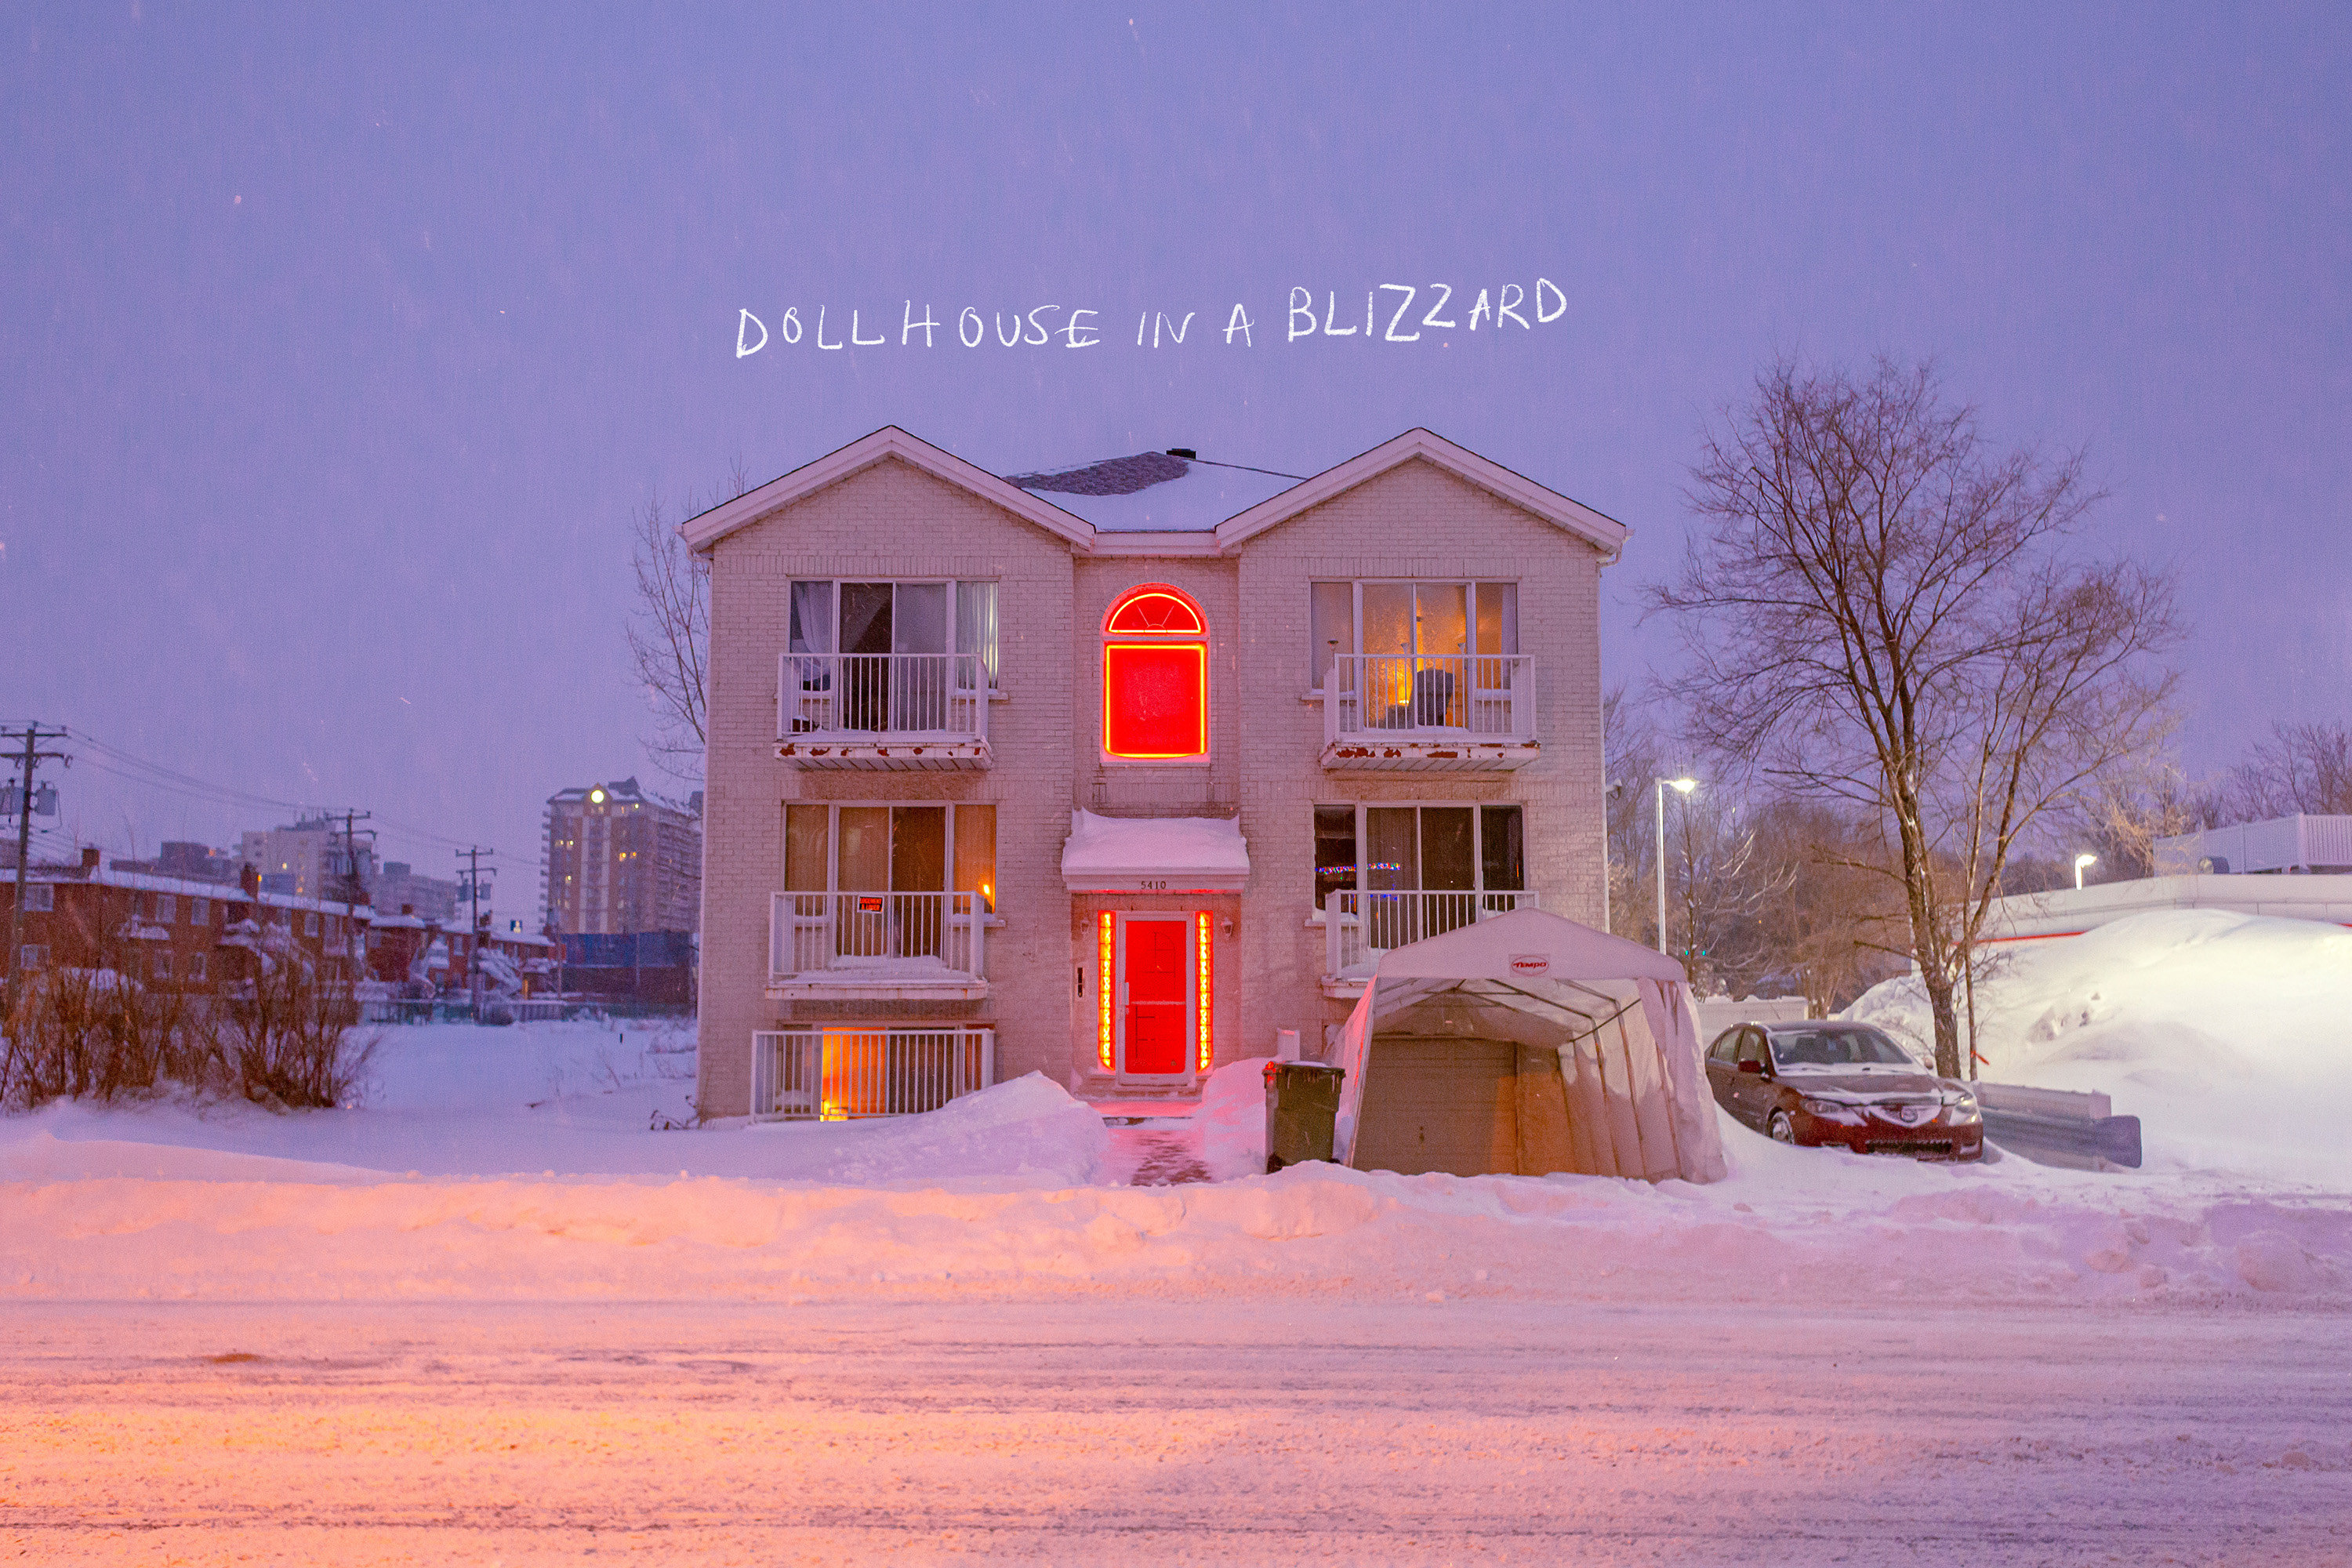 A house in the winter with the text on the image reading &quot;dollhouse in a blizzard&quot;